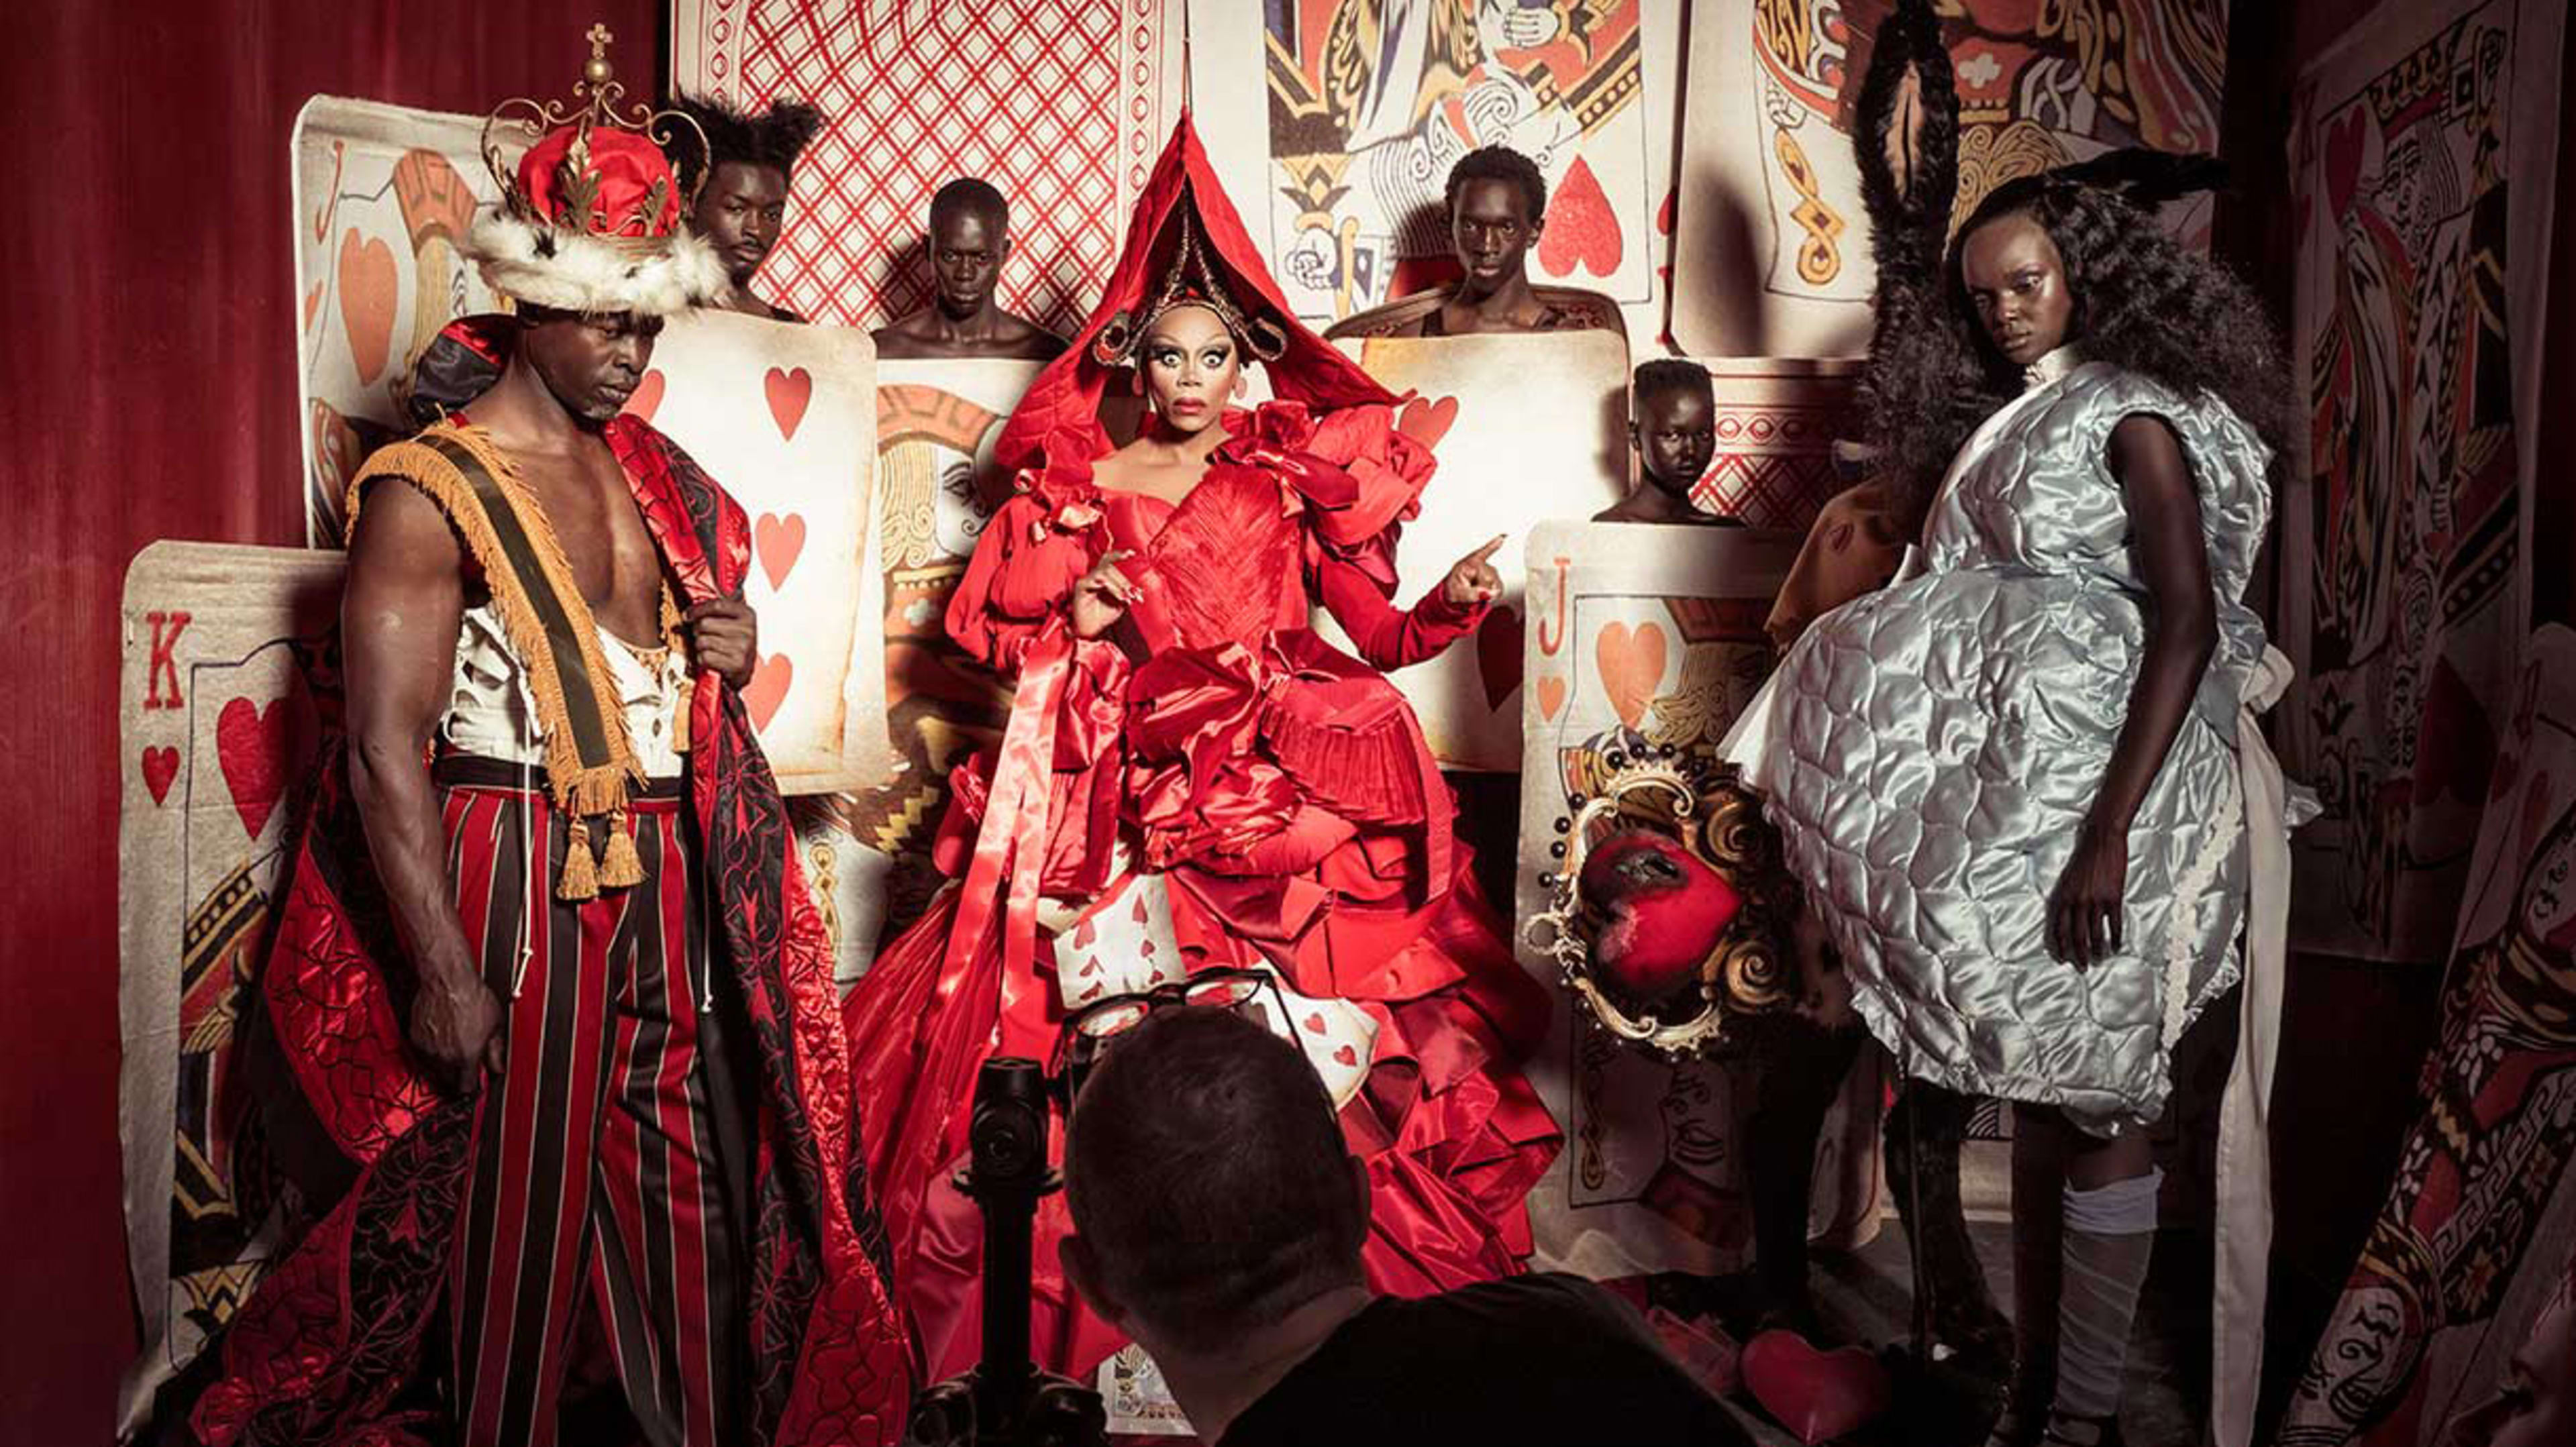 The 2018 Pirelli Calendar Is Here With An All-Black “Alice In Wonderland” Cast